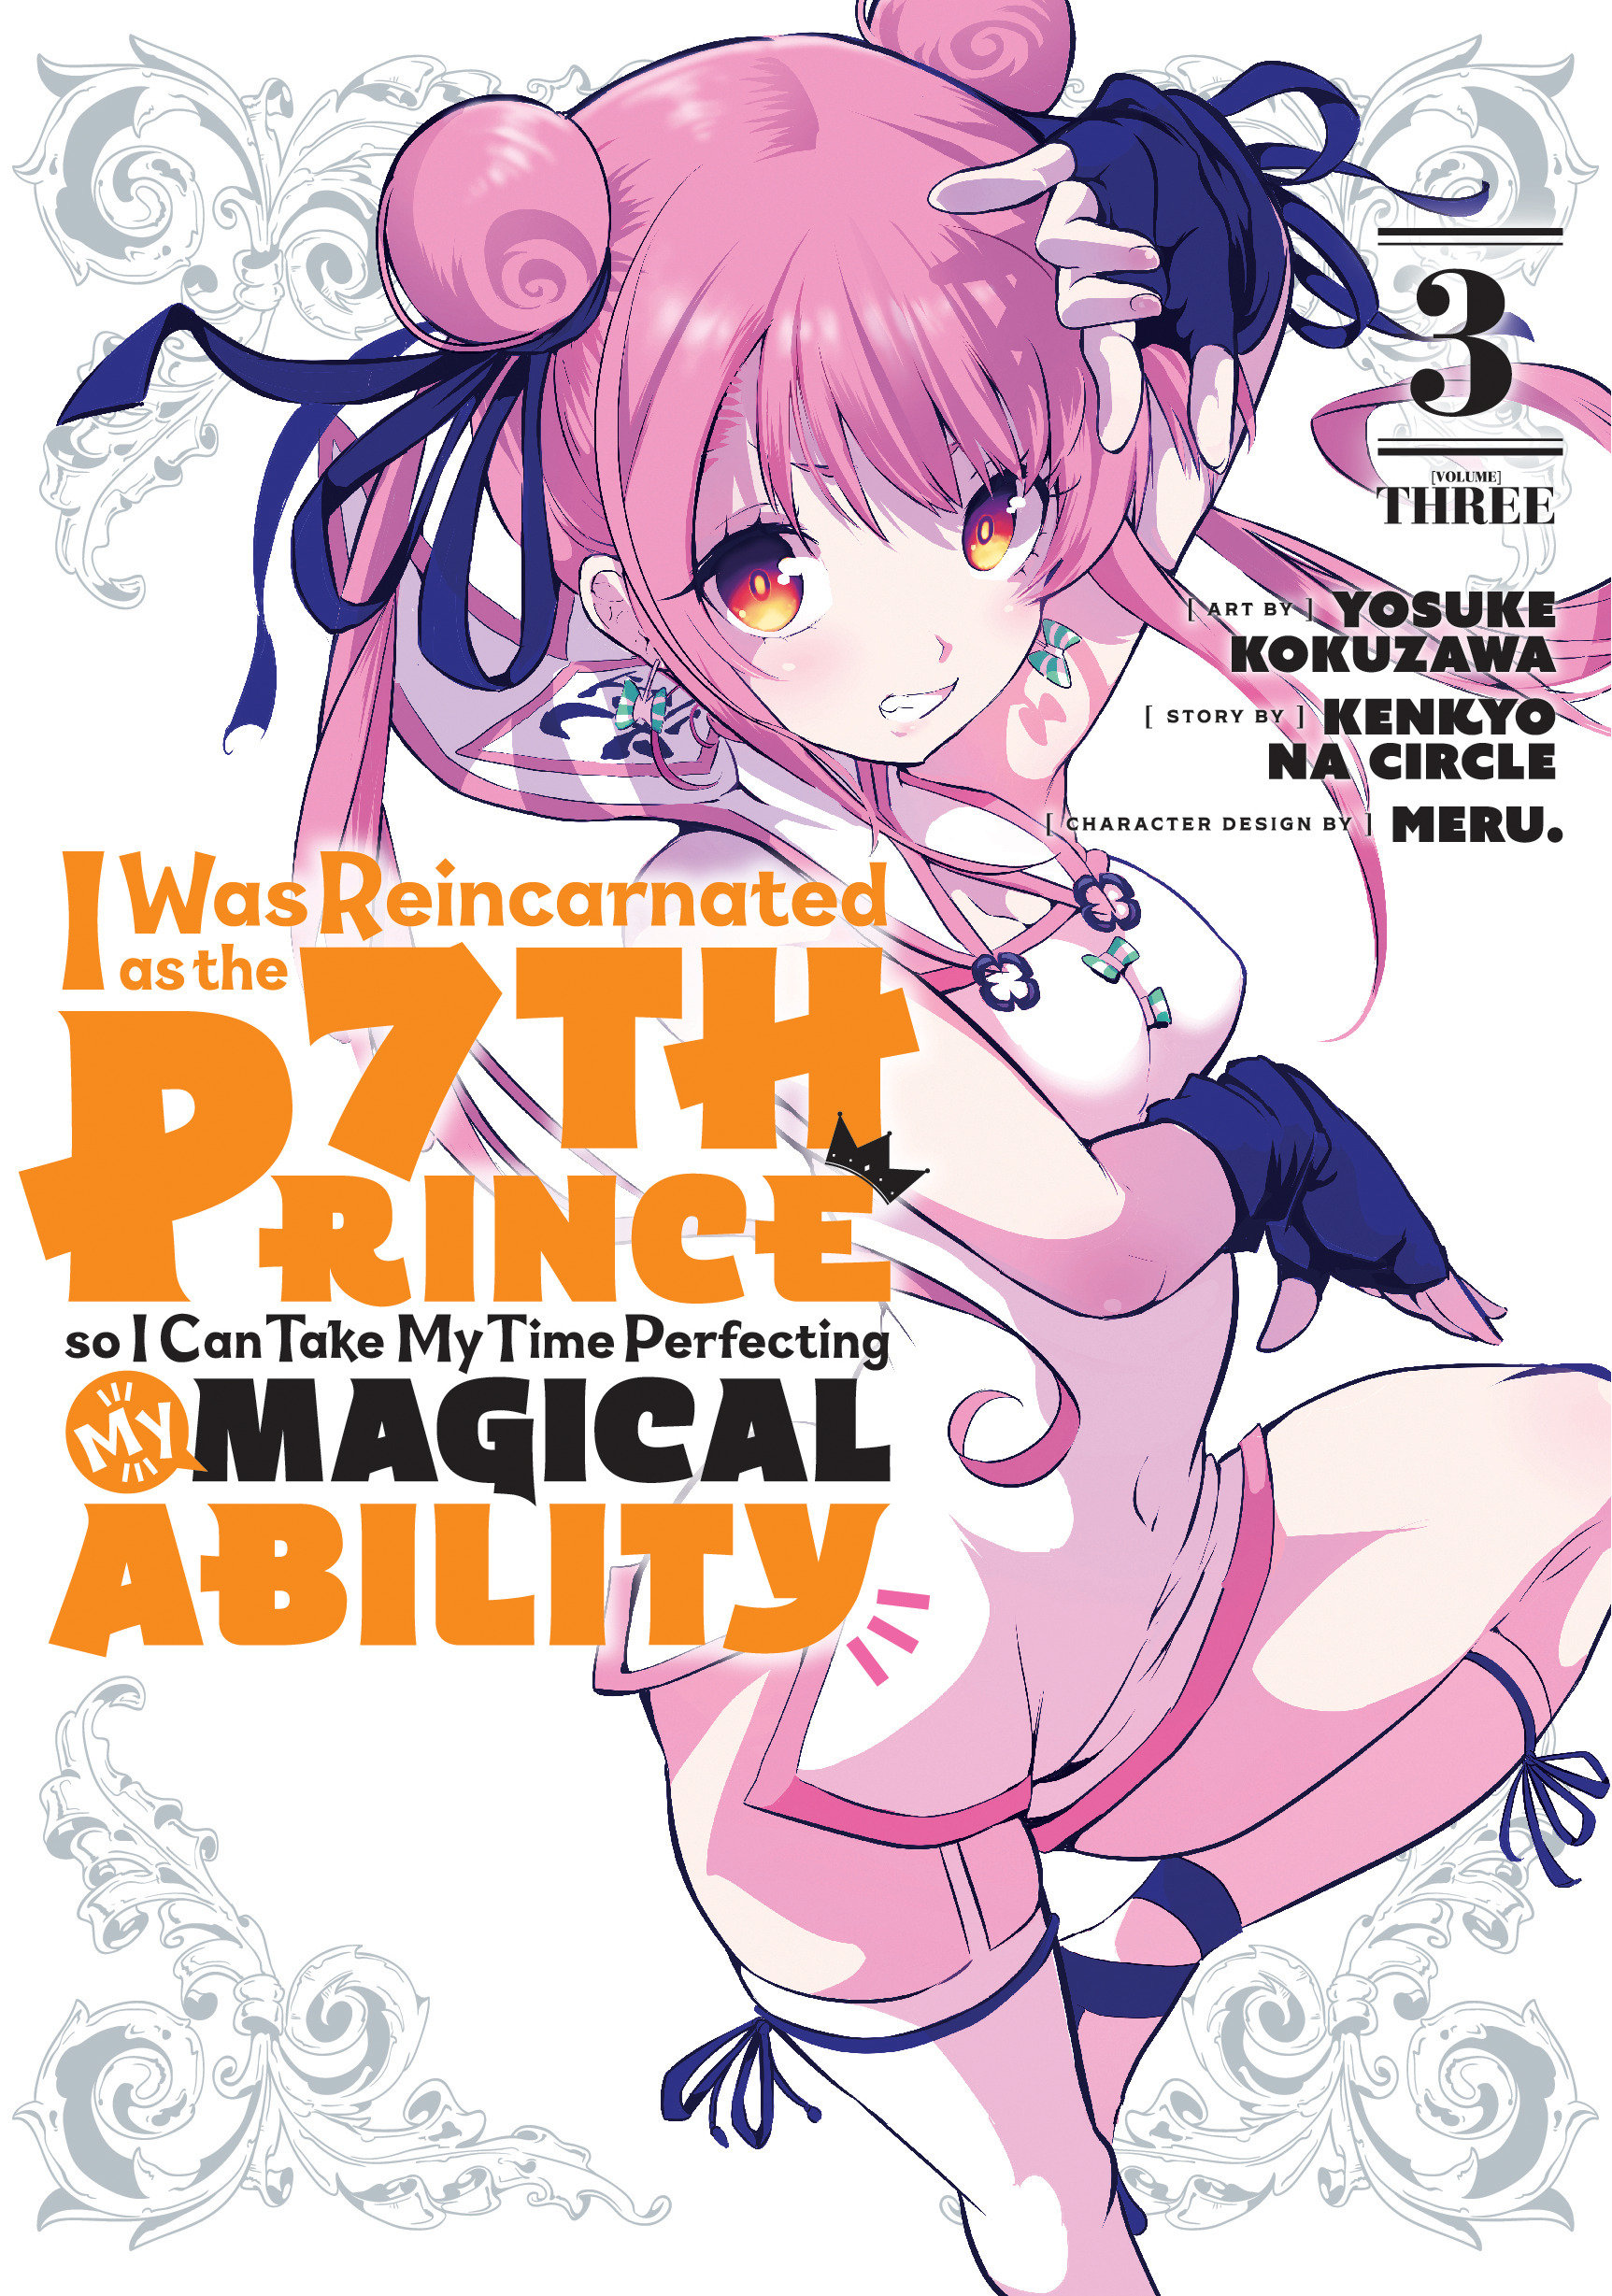 I Was Reincarnated as the 7th Prince So I Can Take My Time Perfecting My Magical Ability Manga Volume 3